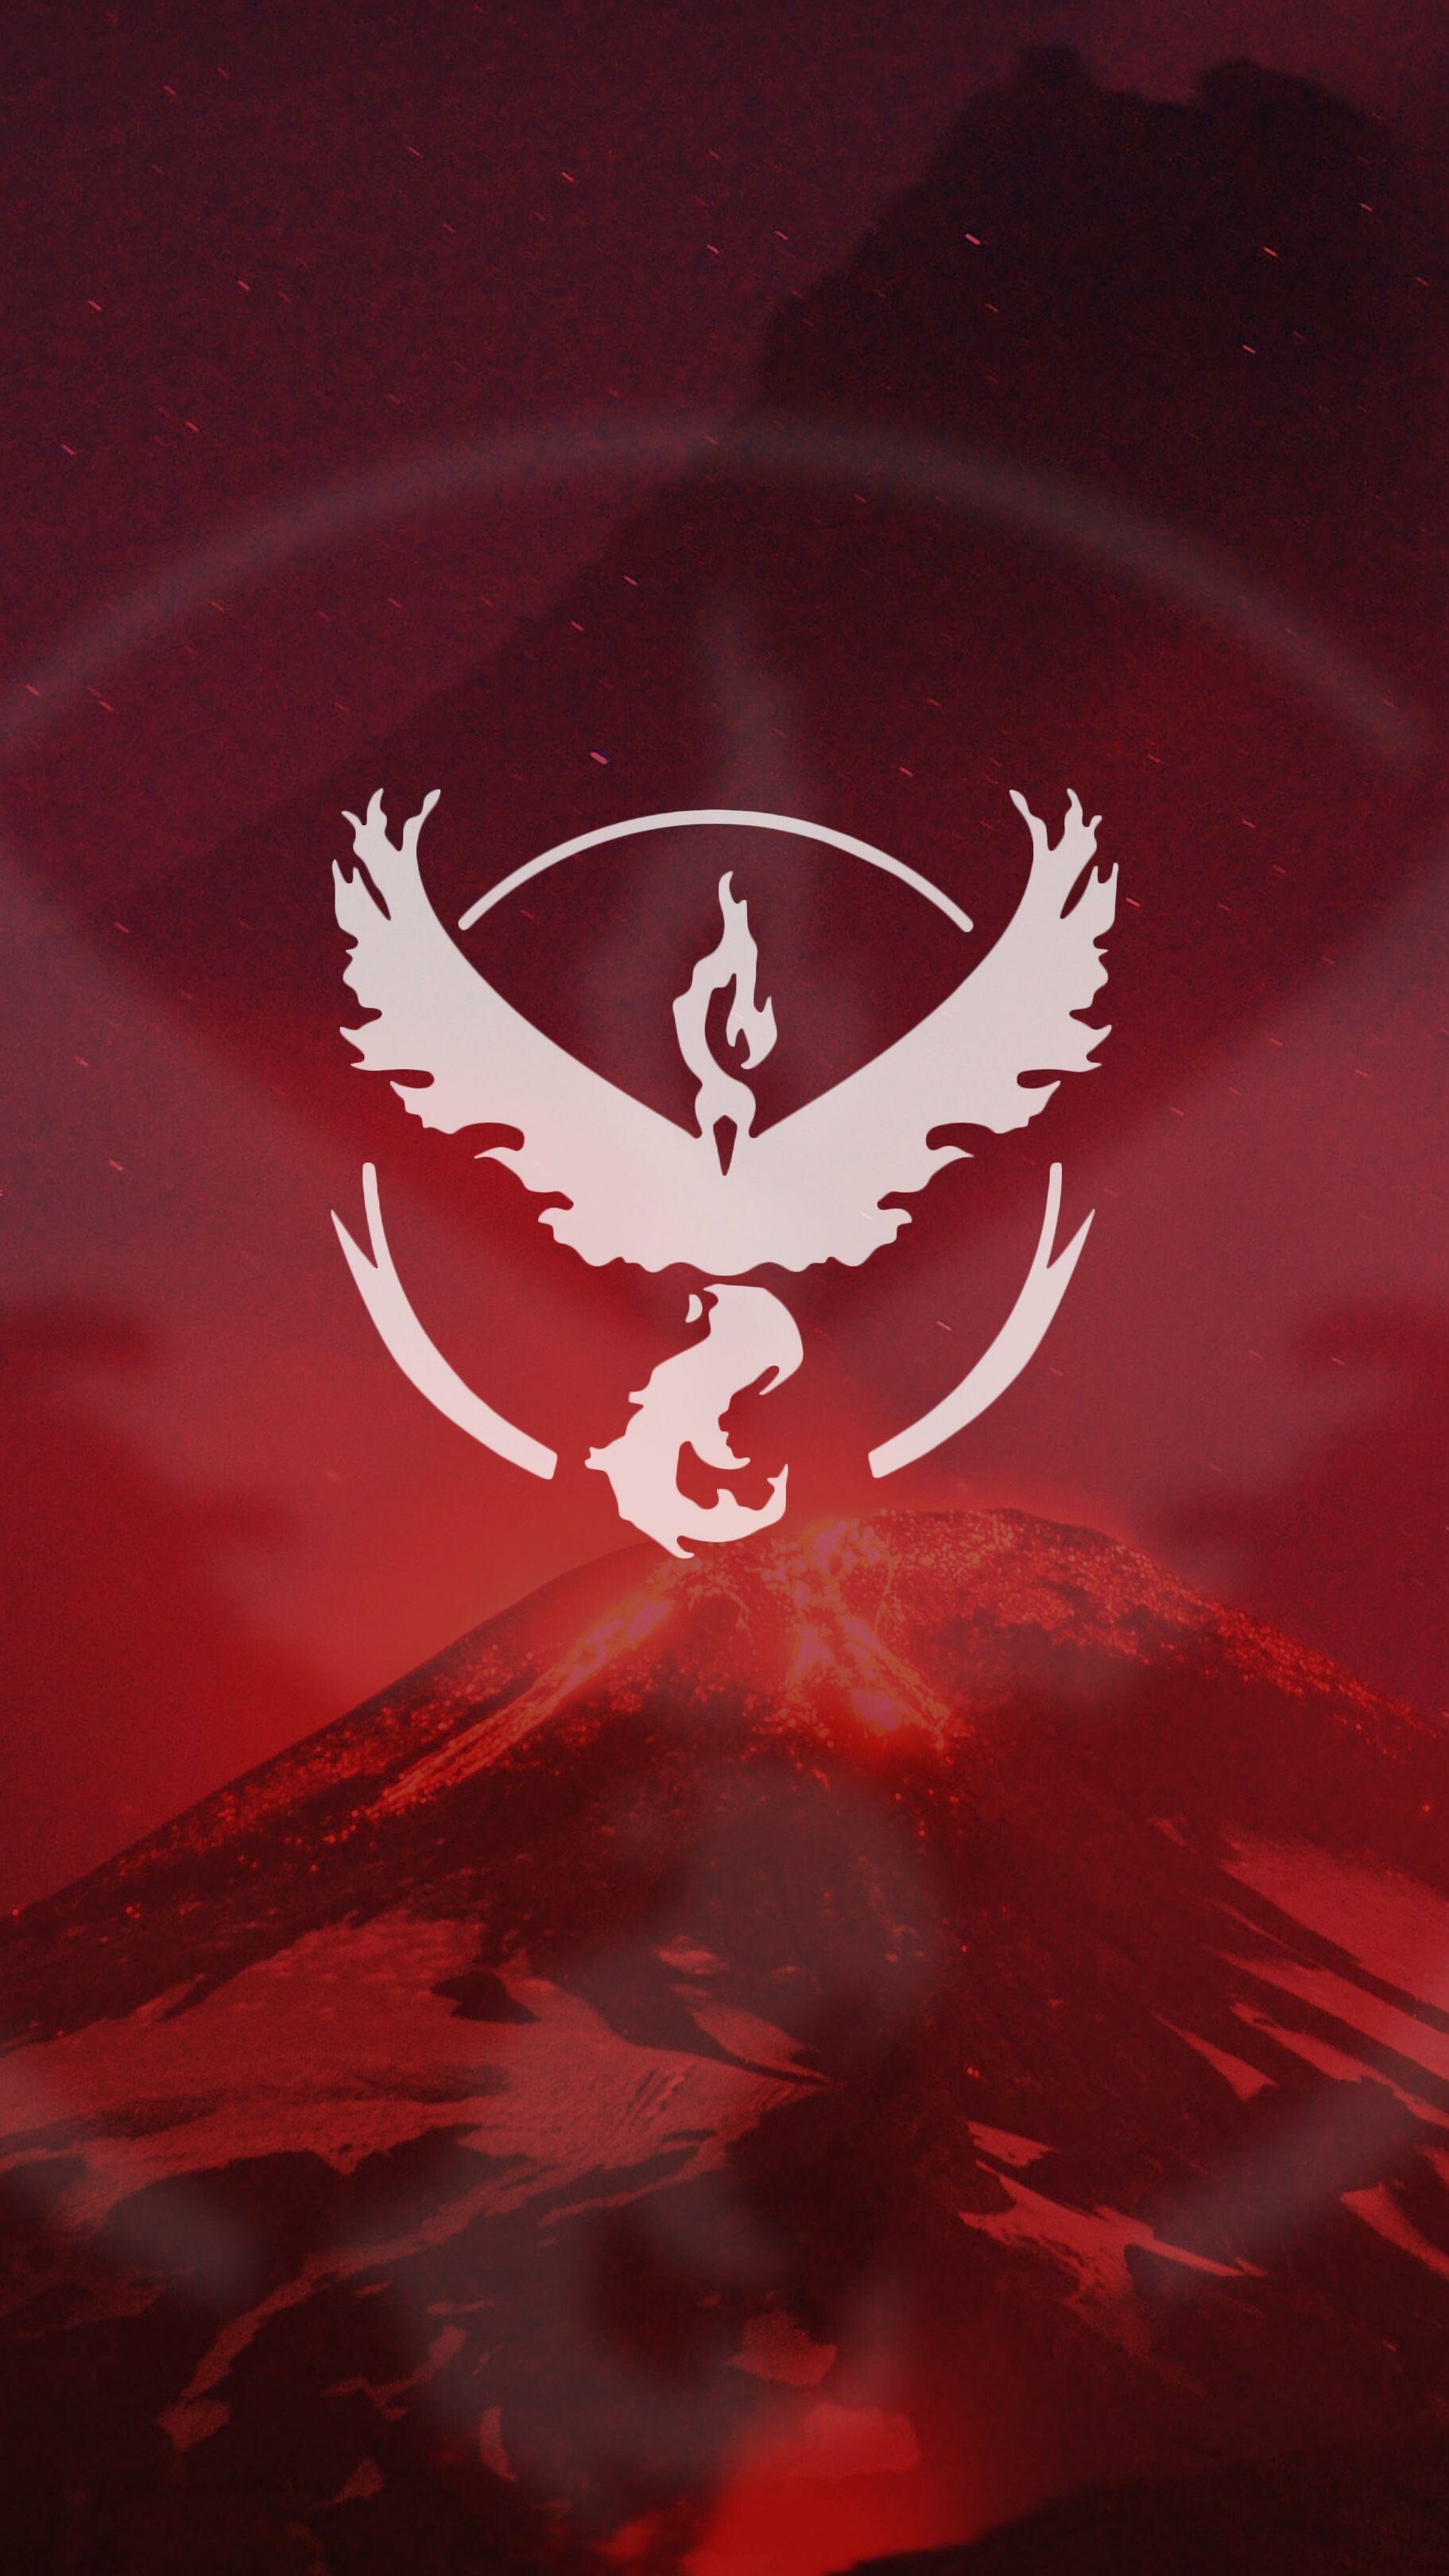 Team Valor wallpapers, Symbol of strength, Fire-themed designs, Unite and conquer, 1830x3240 HD Phone